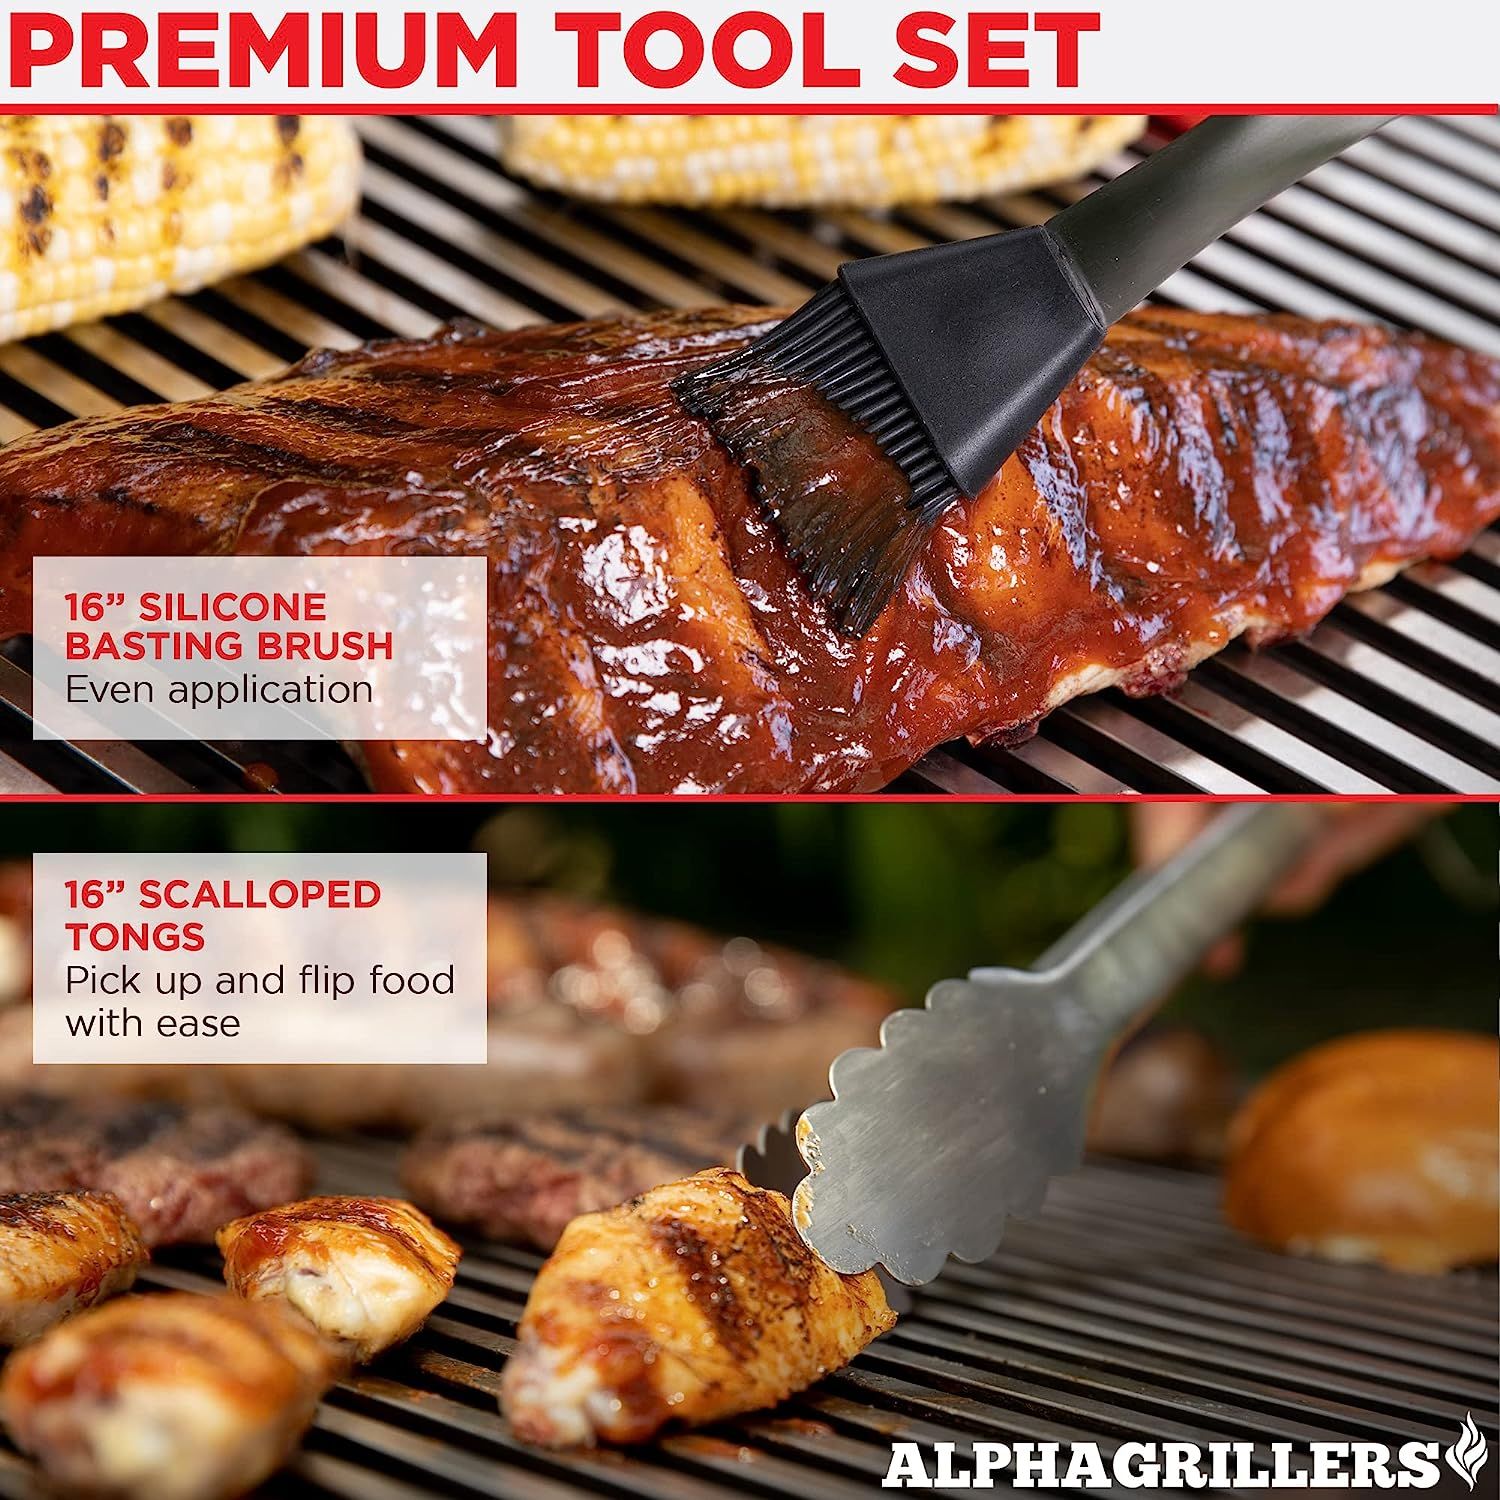 https://media.karousell.com/media/photos/products/2023/8/22/alpha_grillers_grill_set_heavy_1692680217_4a4682cd_progressive